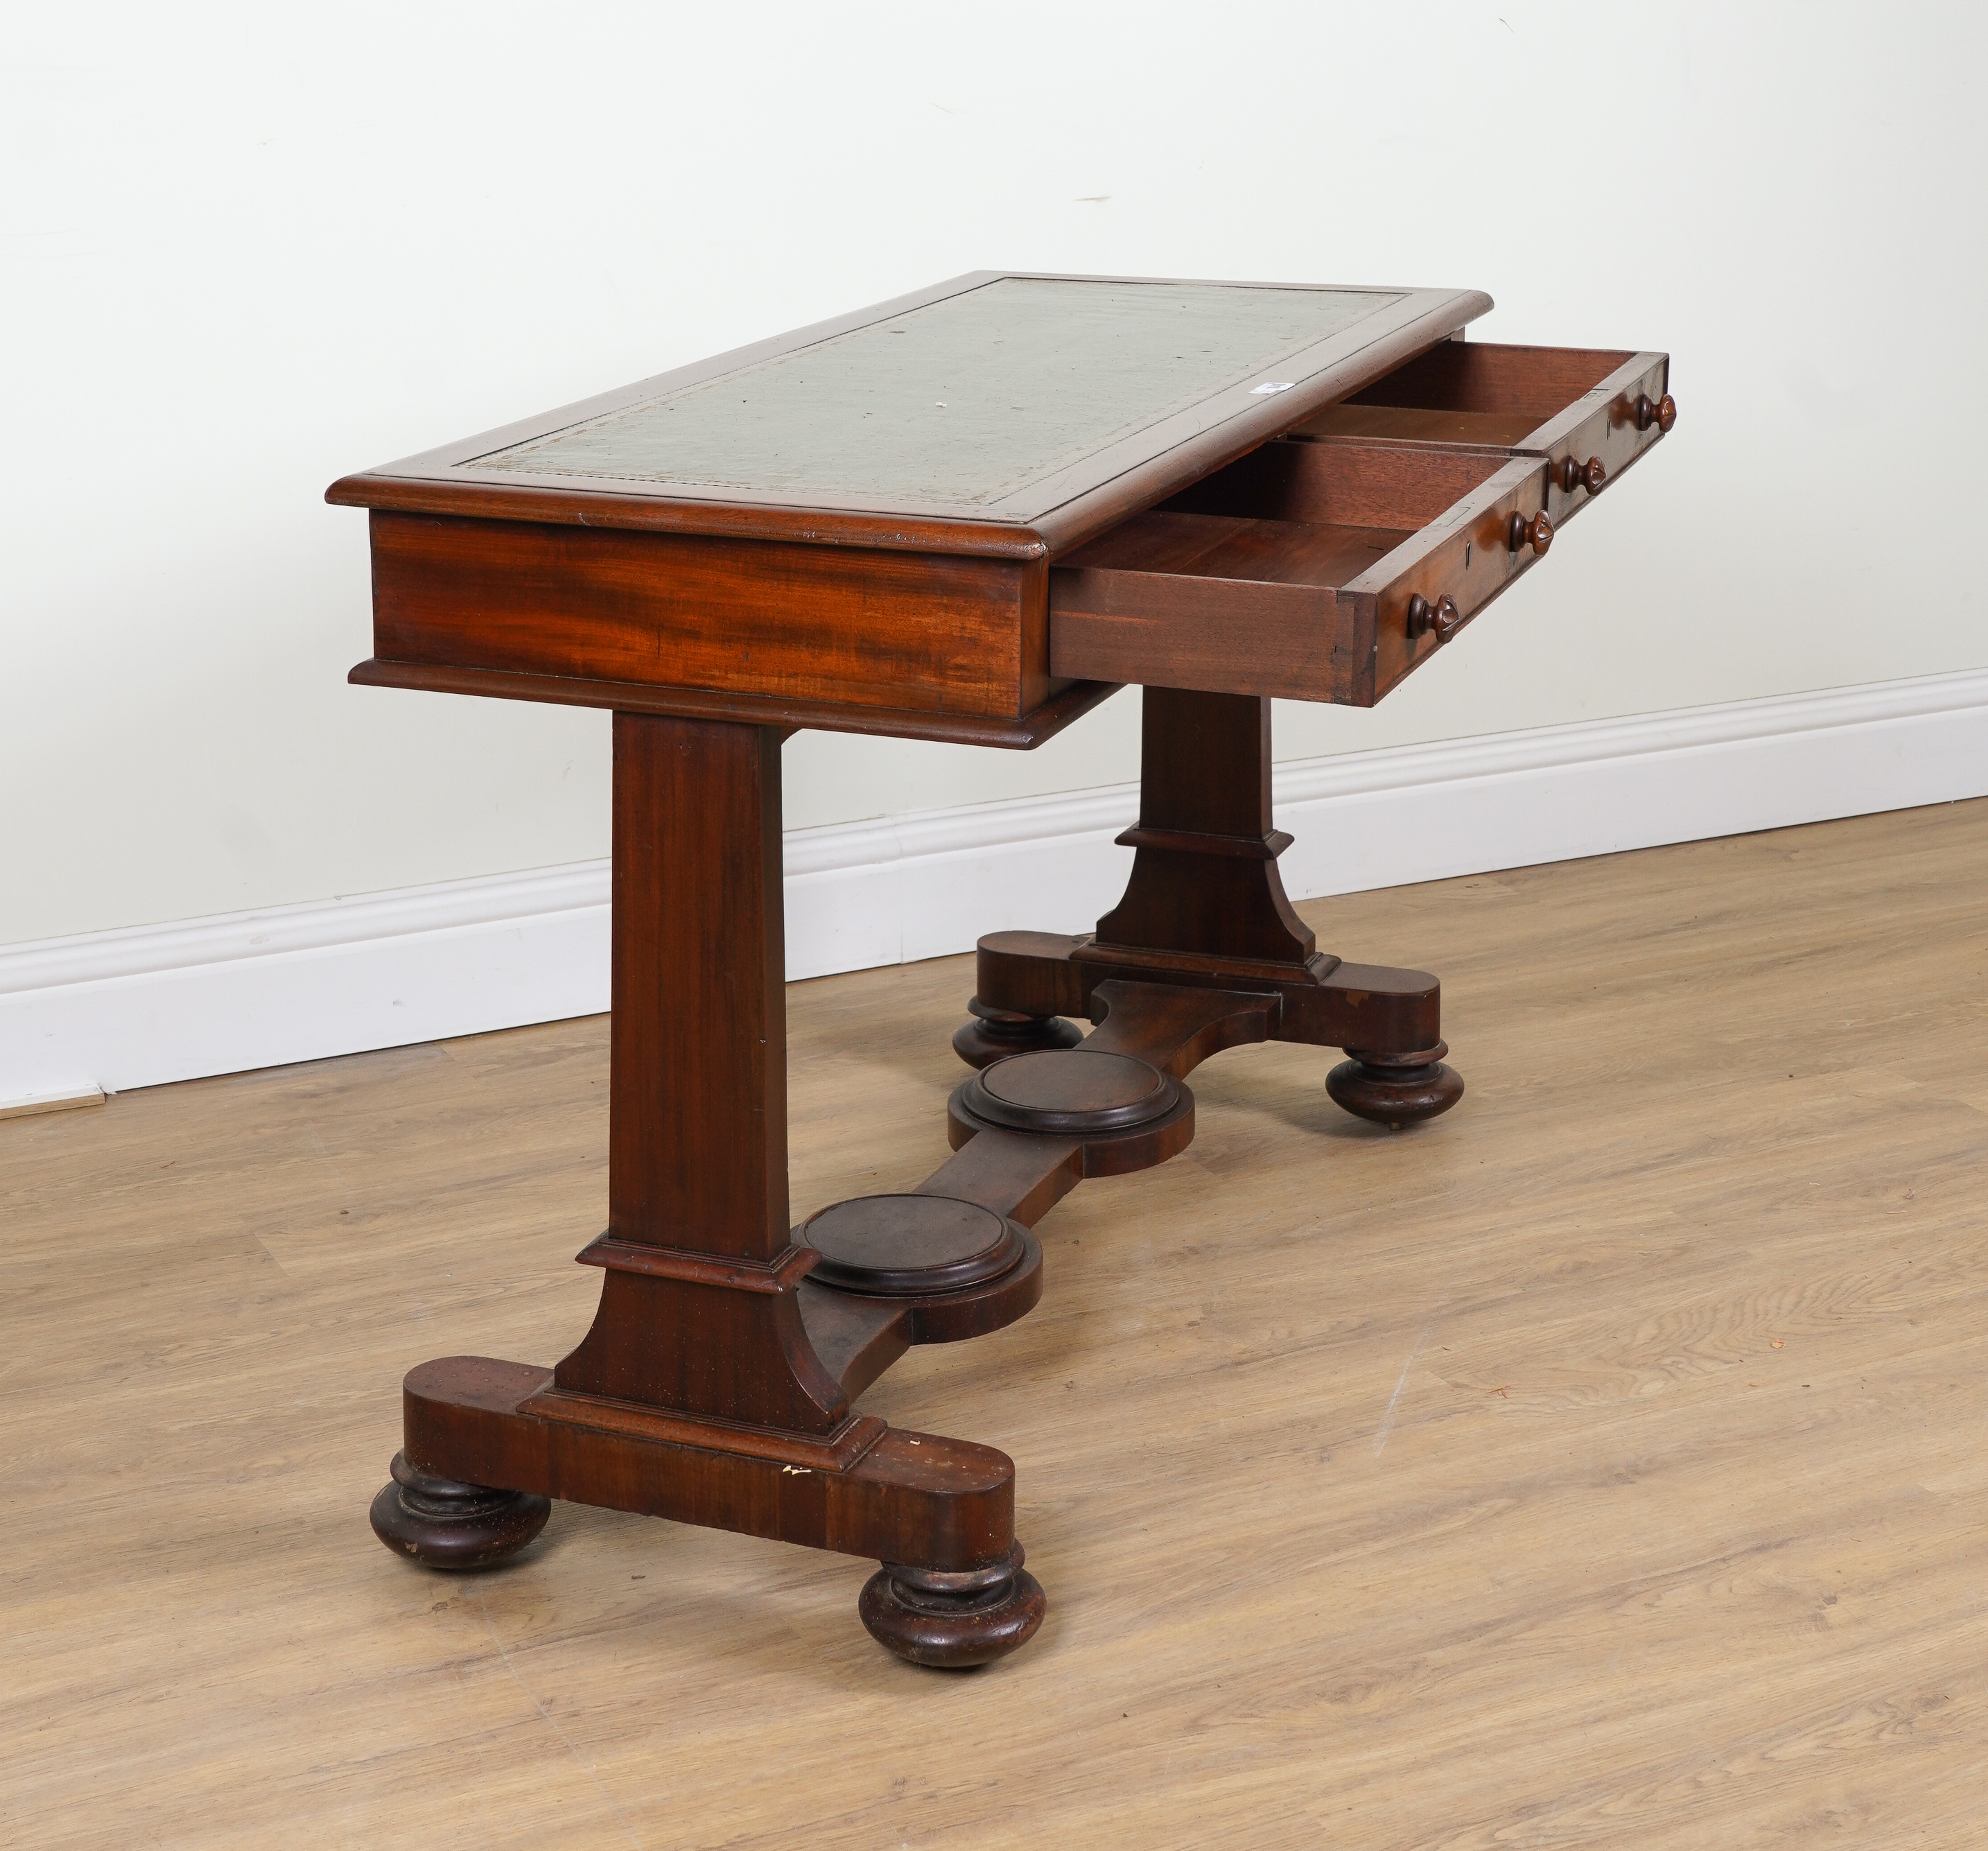 A MID 19TH CENTURY MAHOGANY TWO DRAWER CENTRE TABLE - Image 3 of 4